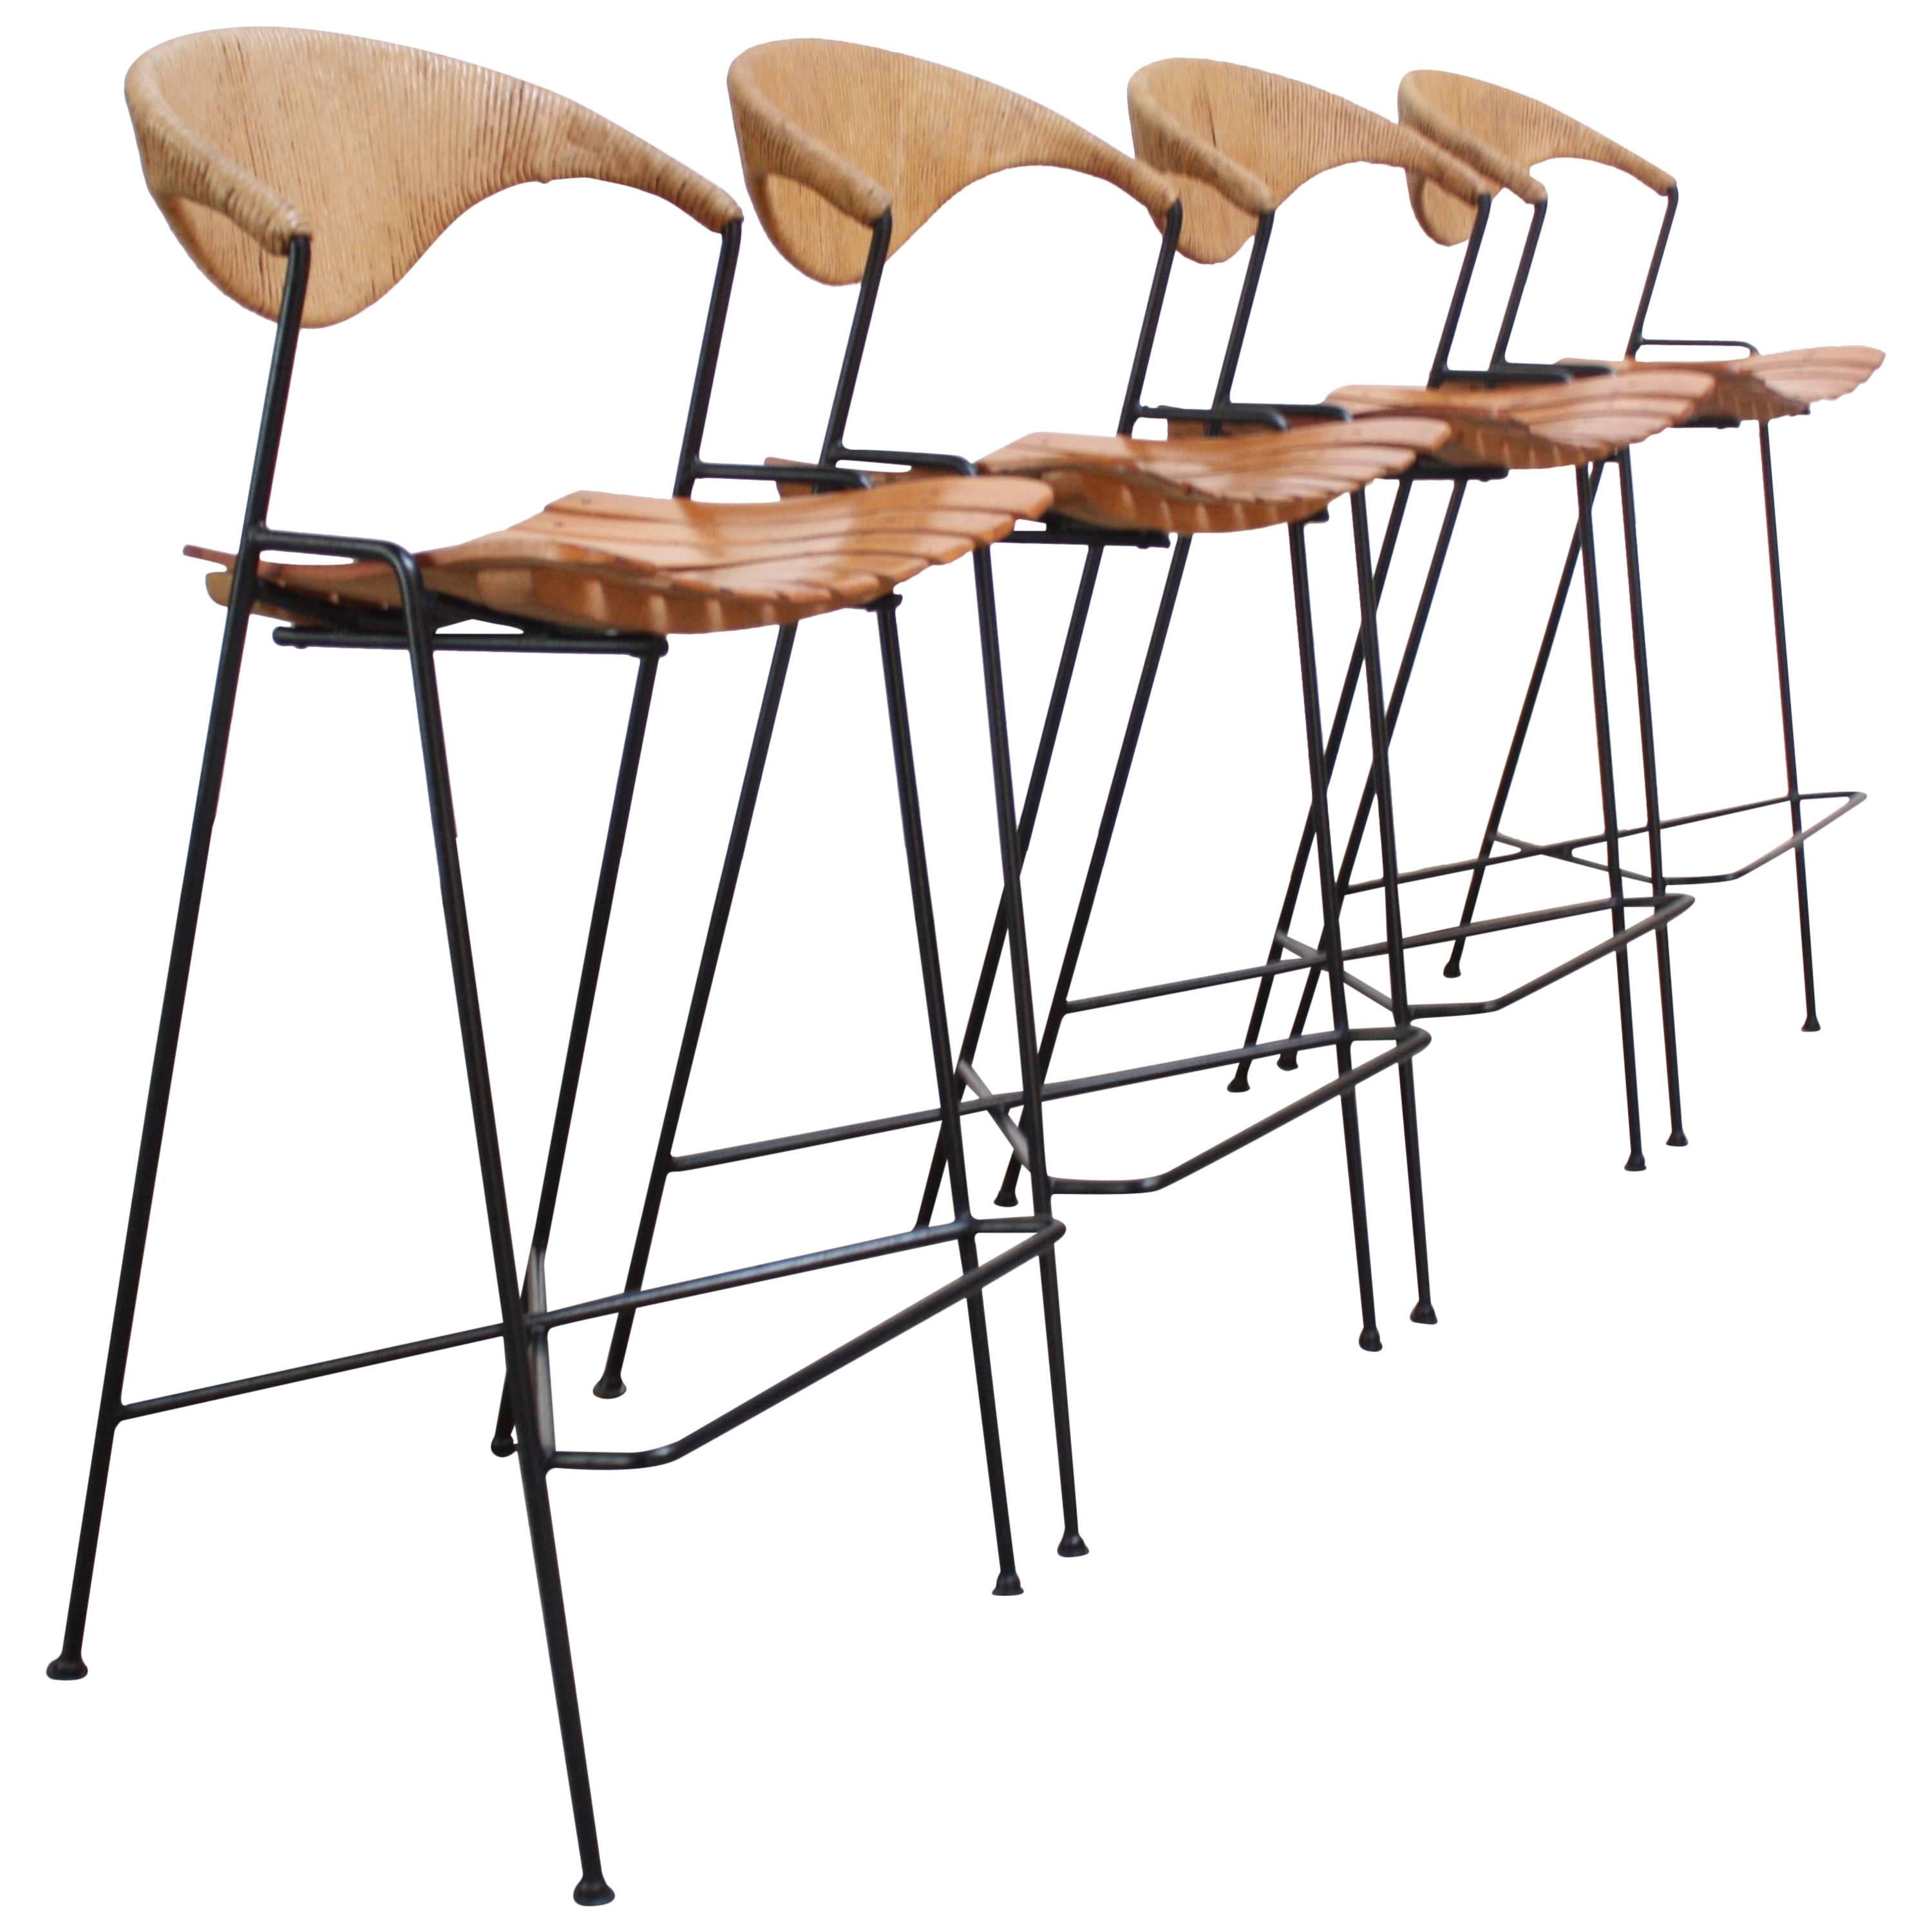 Set of Four Rush and Iron Stools by Arthur Umanoff for Raymor